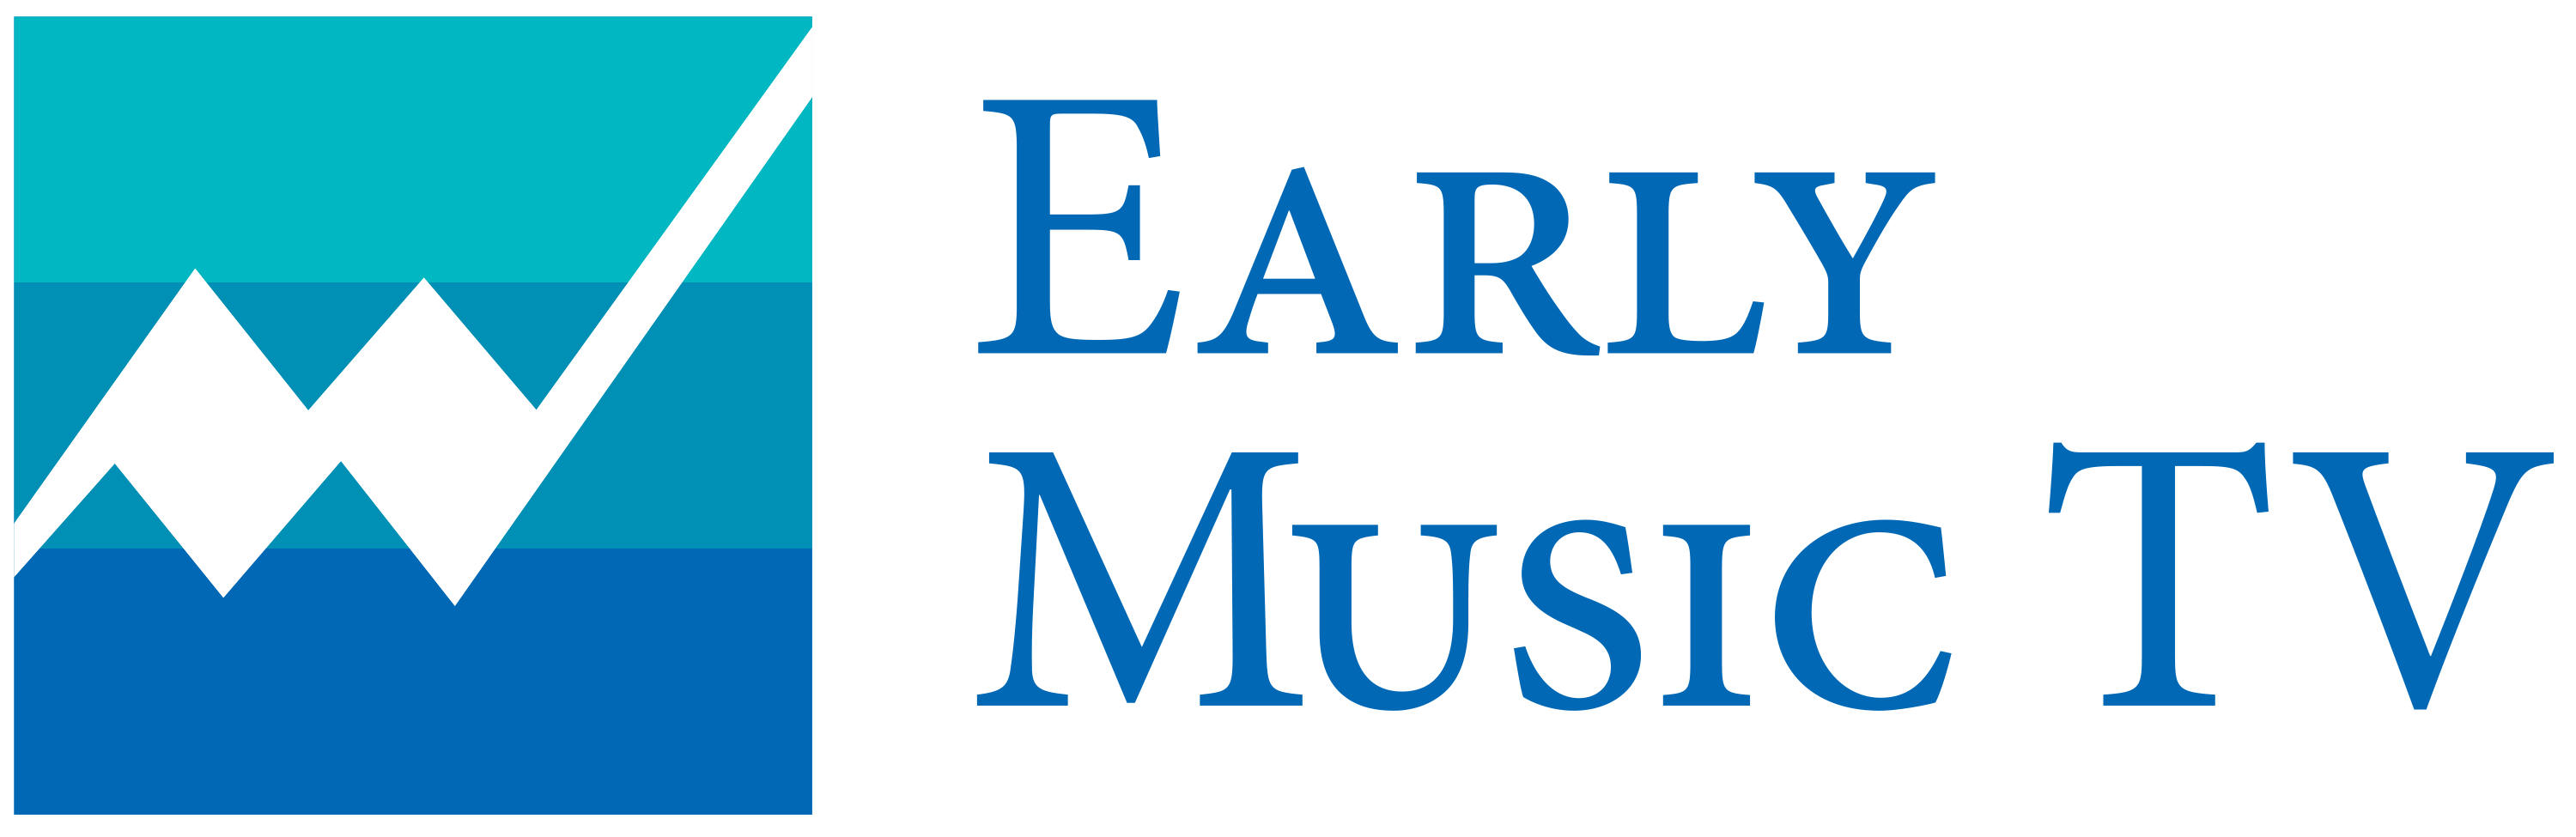 Early Music TV Logo and Link